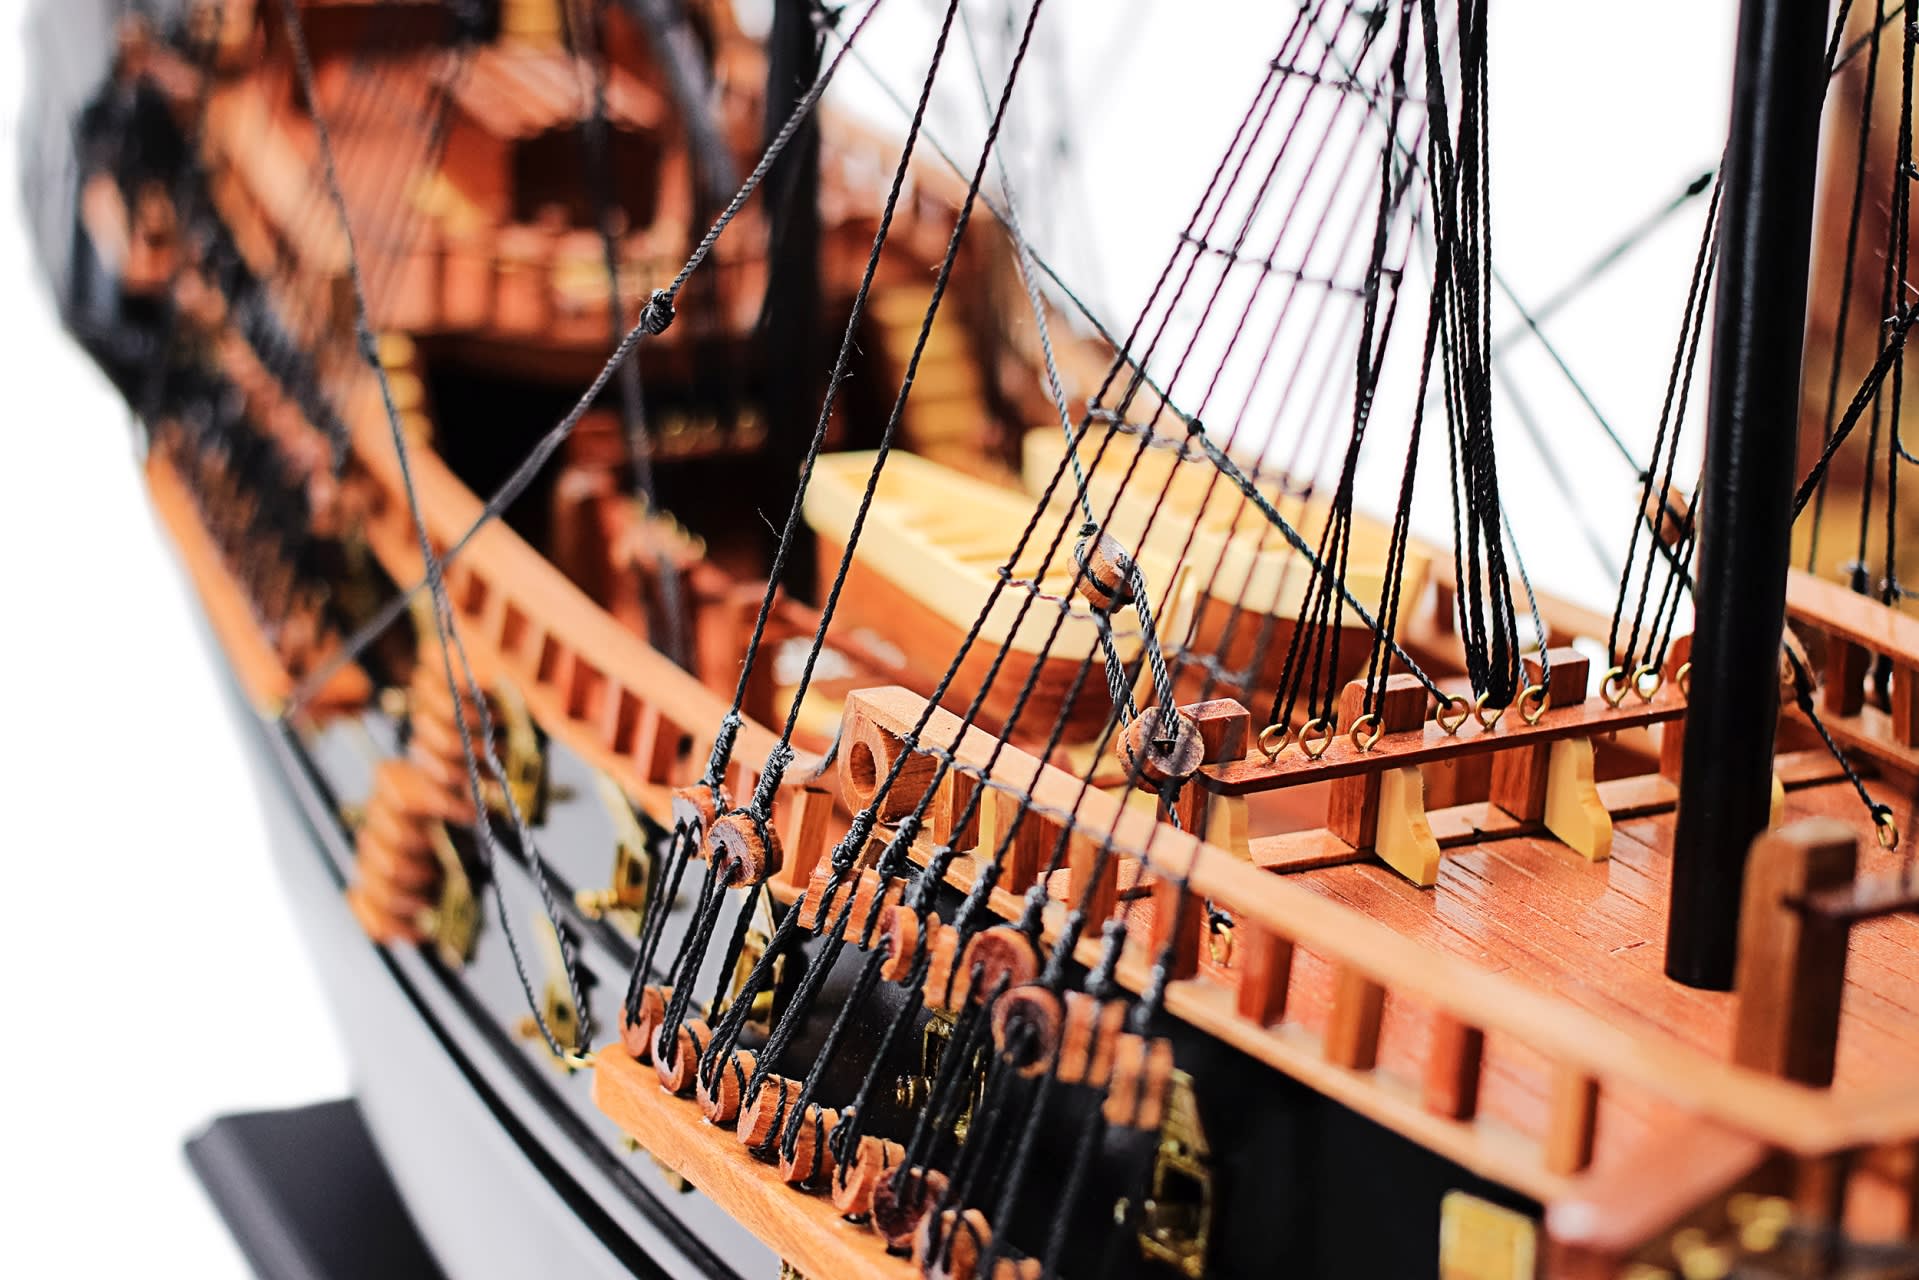 Black Pearl Model Pirate Ship - BP80R - Models - Yachts and Ships - Comarch  e-Sklep